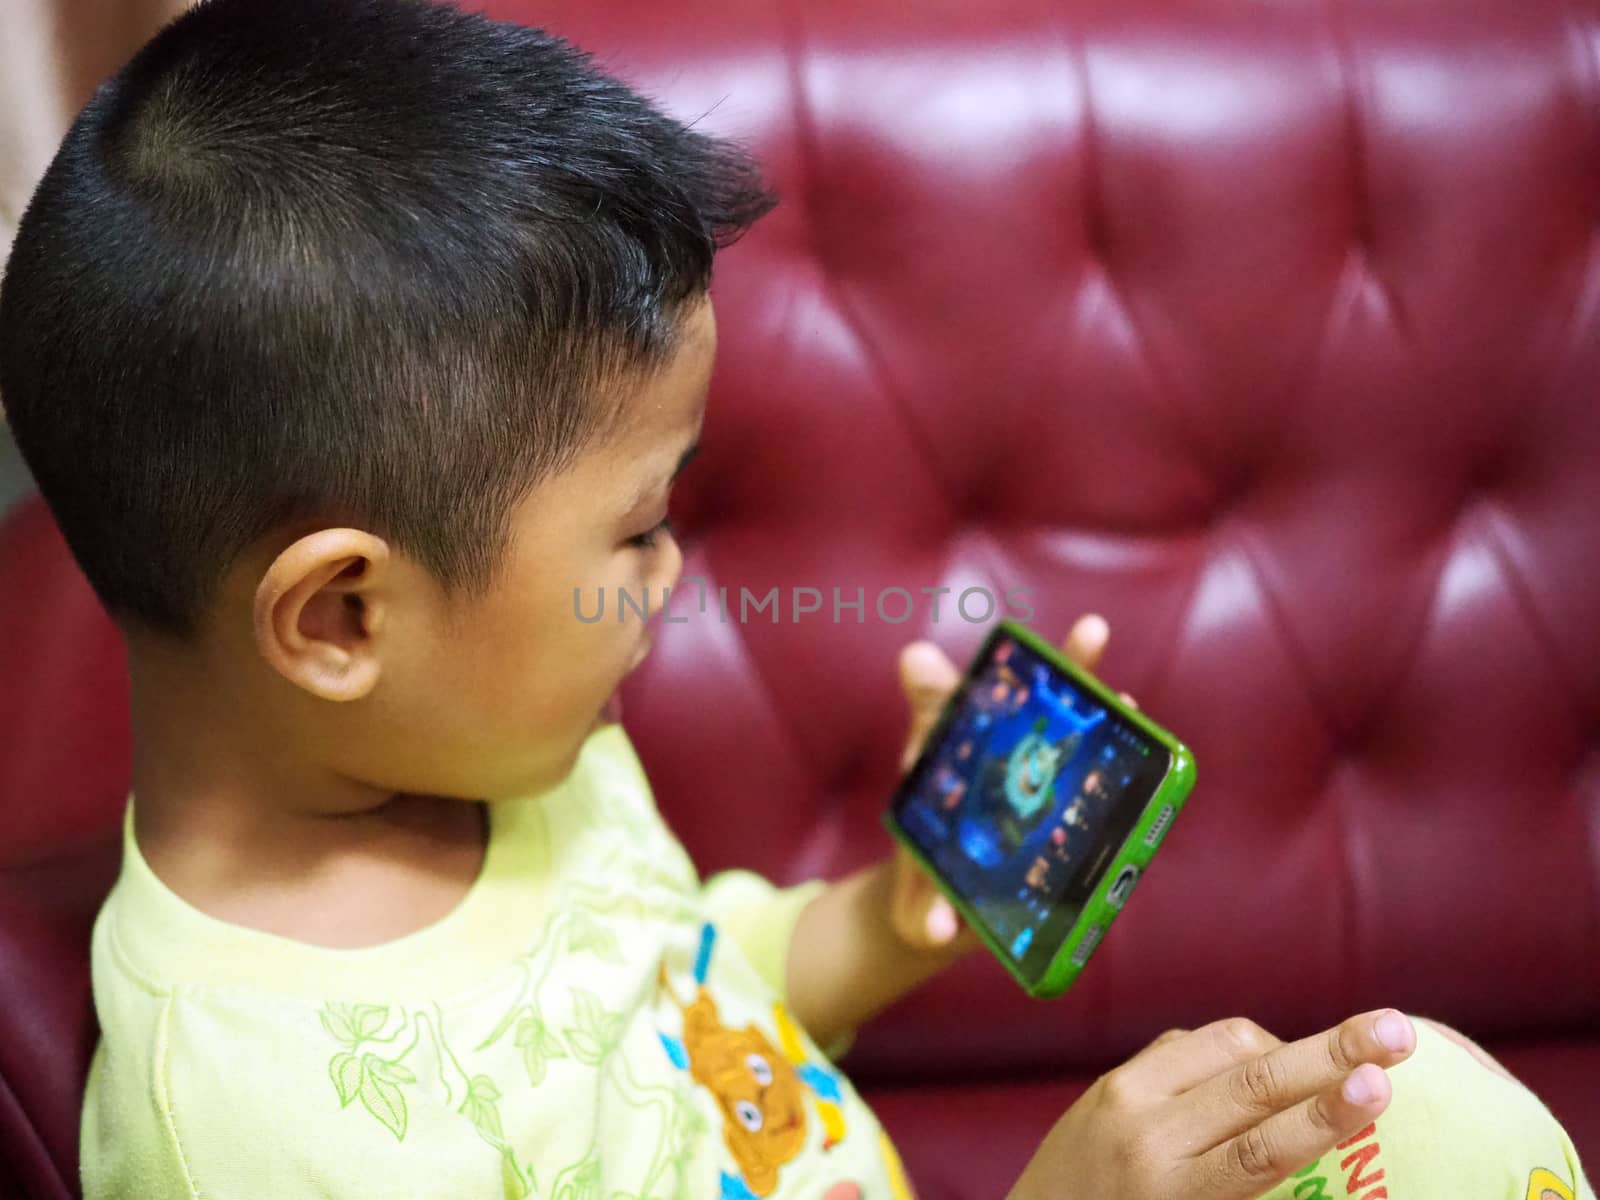 The boy is playing games in the mobile phone. On the red sofa intently. Phone blurred screen.